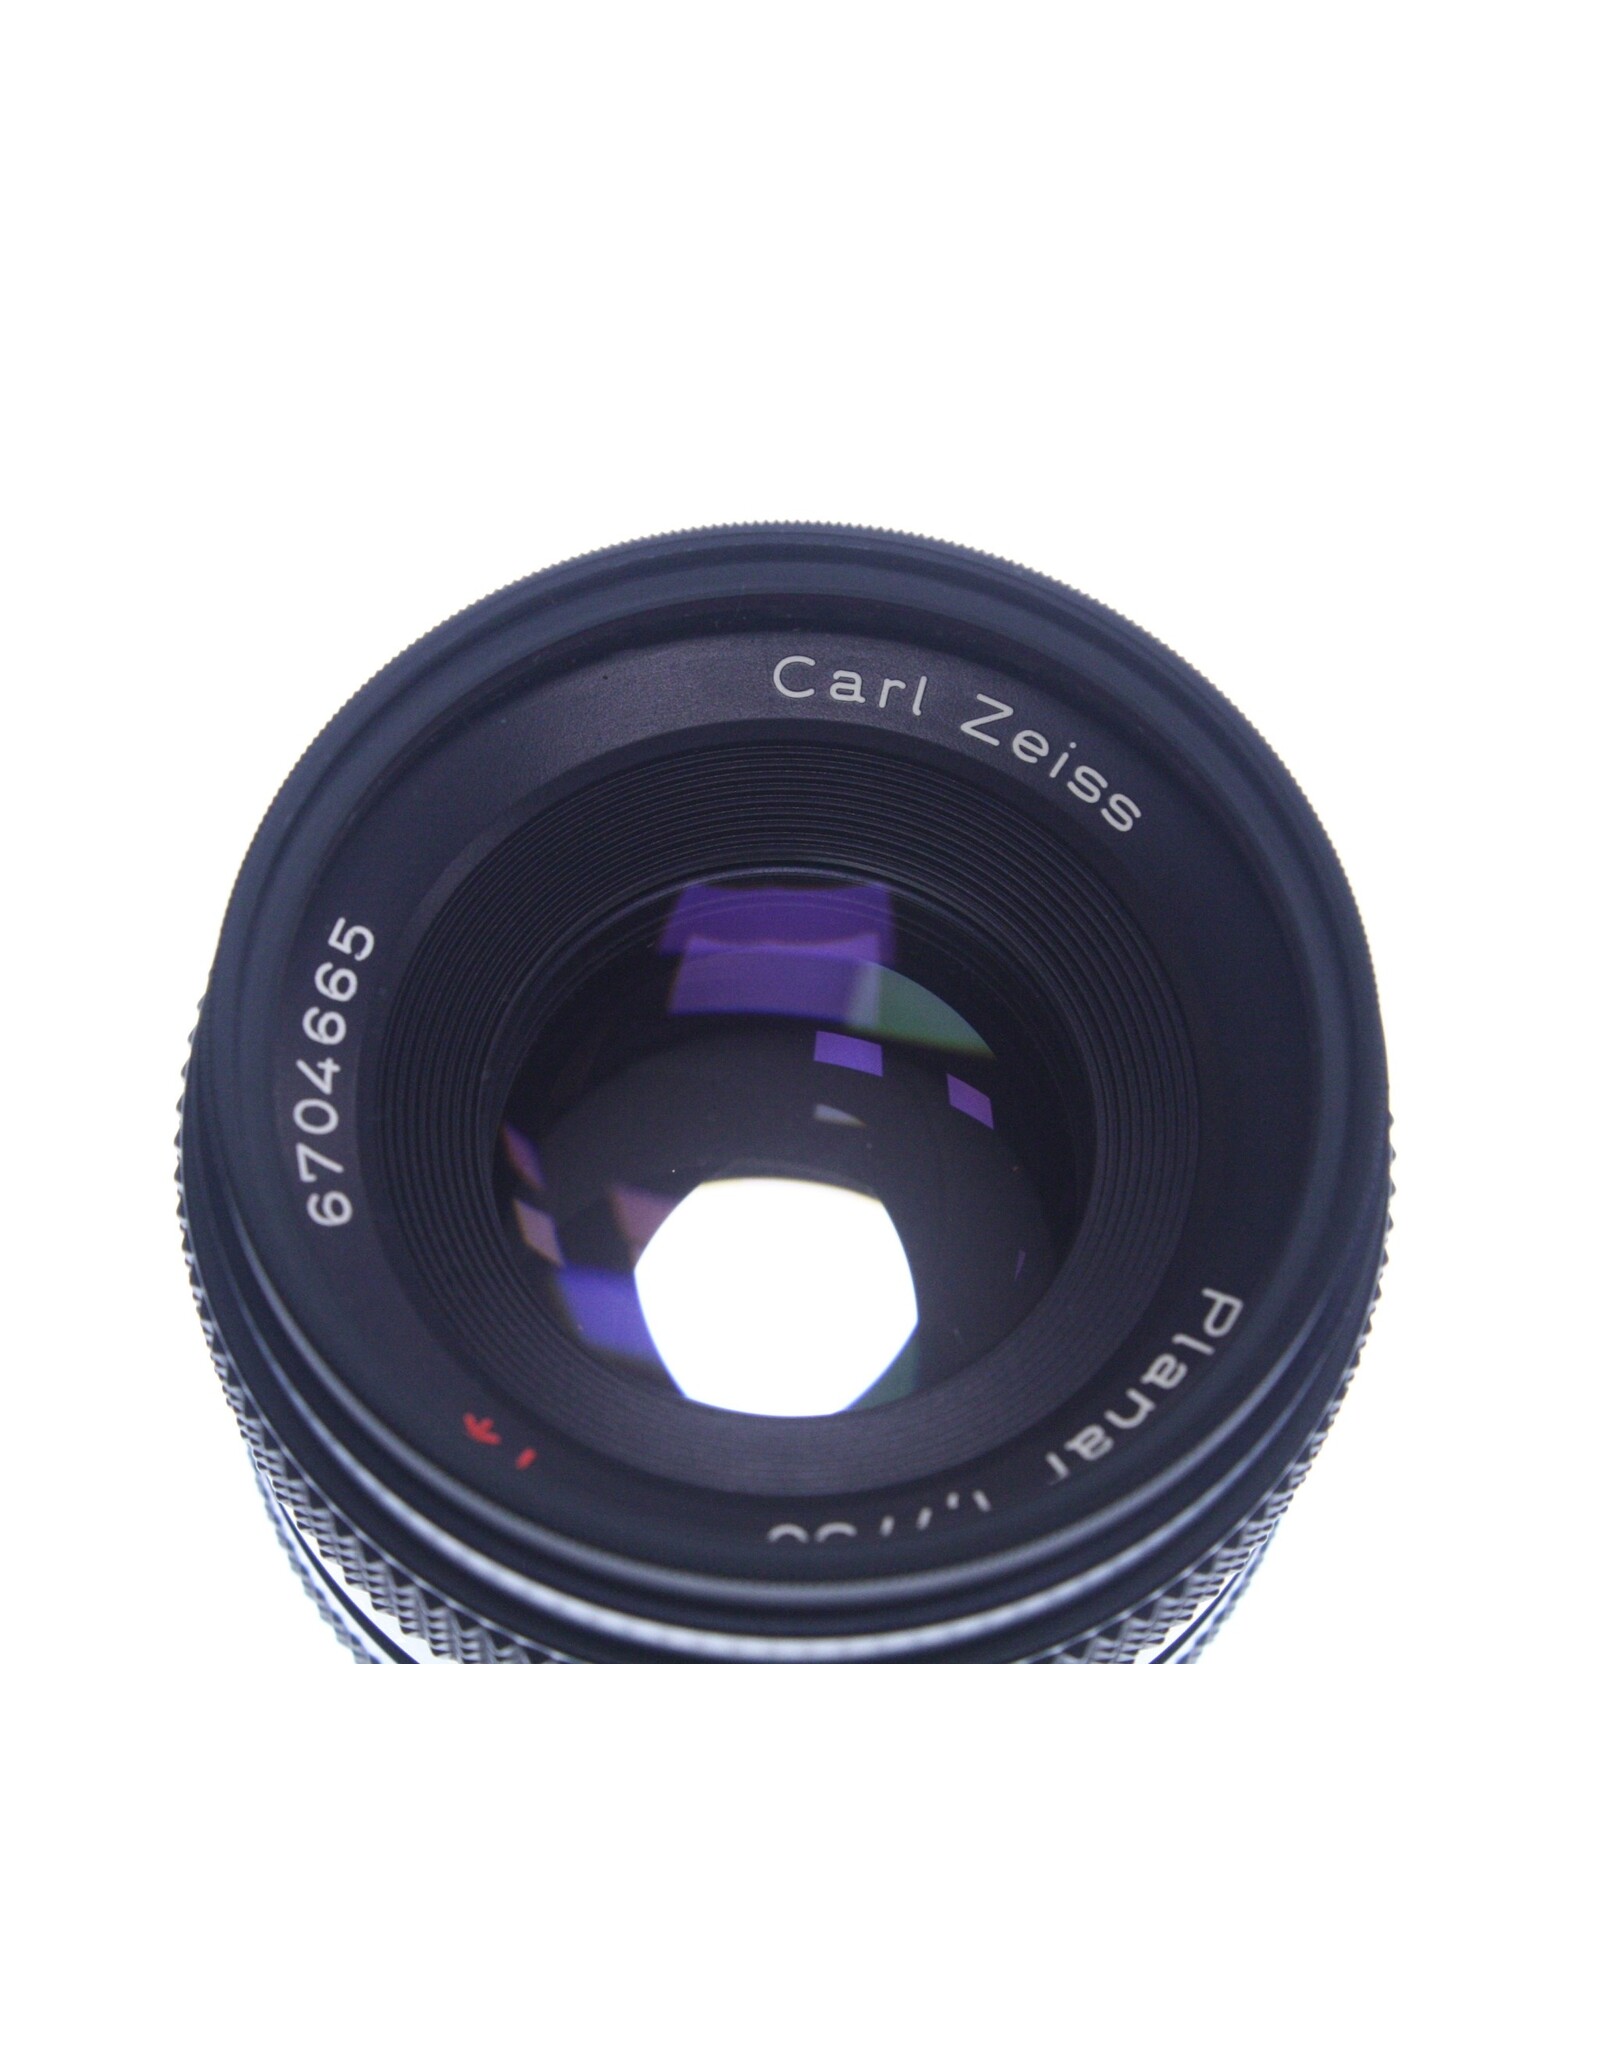 Carl Zeiss Carl Zeiss Planar f/1.7 50mm T* Lens for Yashica/Contax Cameras (Pre-Owned)